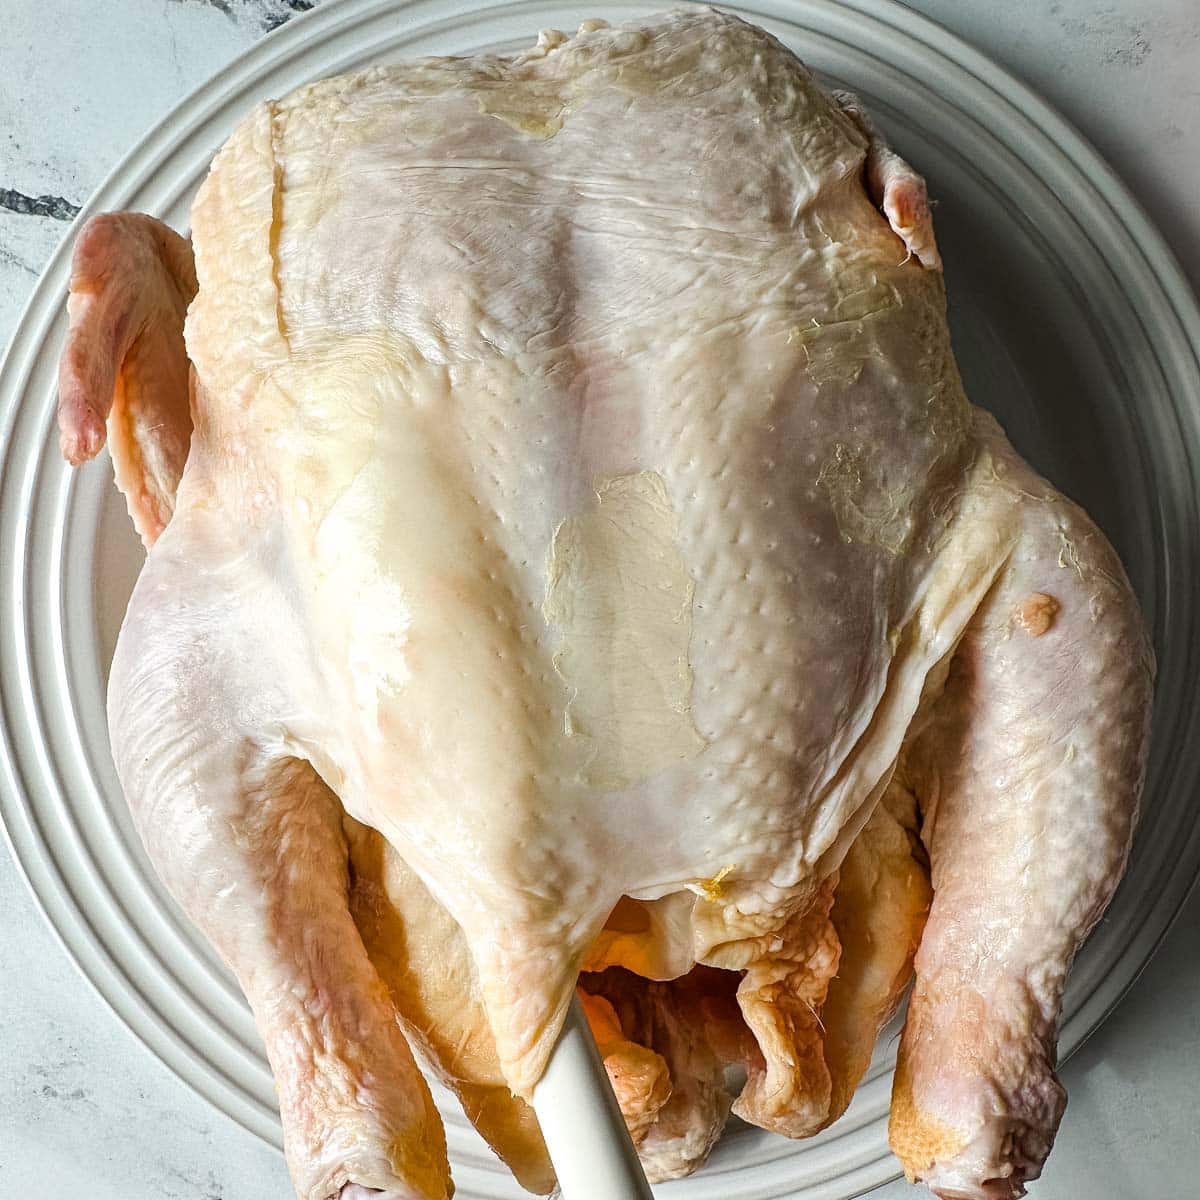 A small spatula is used to smear orange zest and butter under the skin of a whole raw chicken.